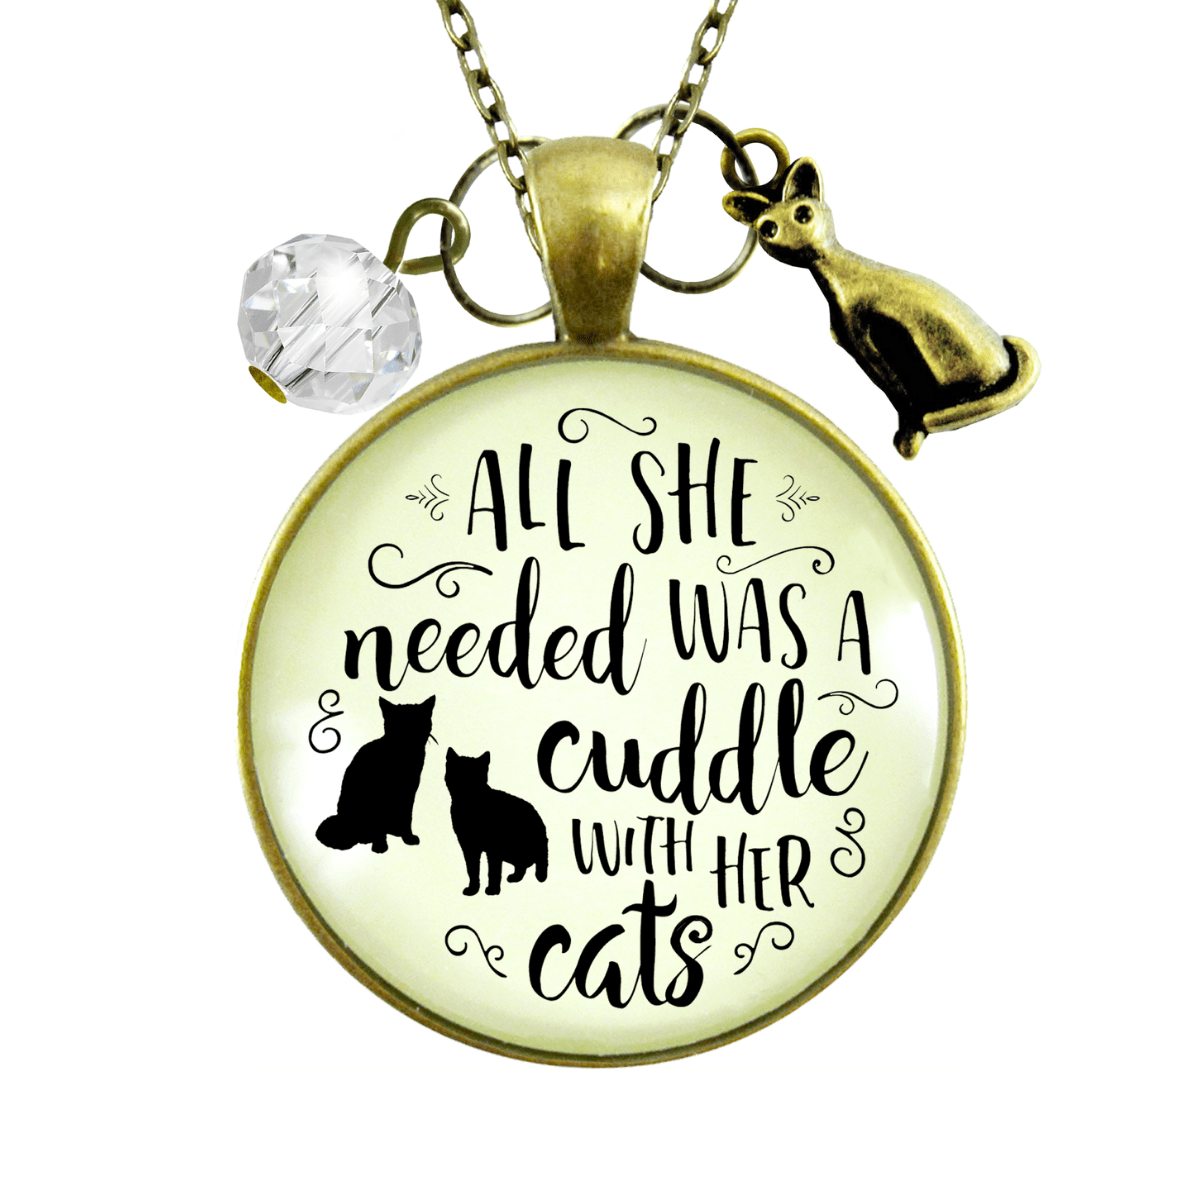 Gutsy Goodness Cats Necklace She Needed Cuddle Quote Kitty Theme Gift Womens Jewelry - Gutsy Goodness Handmade Jewelry;Cats Necklace She Needed Cuddle Quote Kitty Theme Gift Womens Jewelry - Gutsy Goodness Handmade Jewelry Gifts